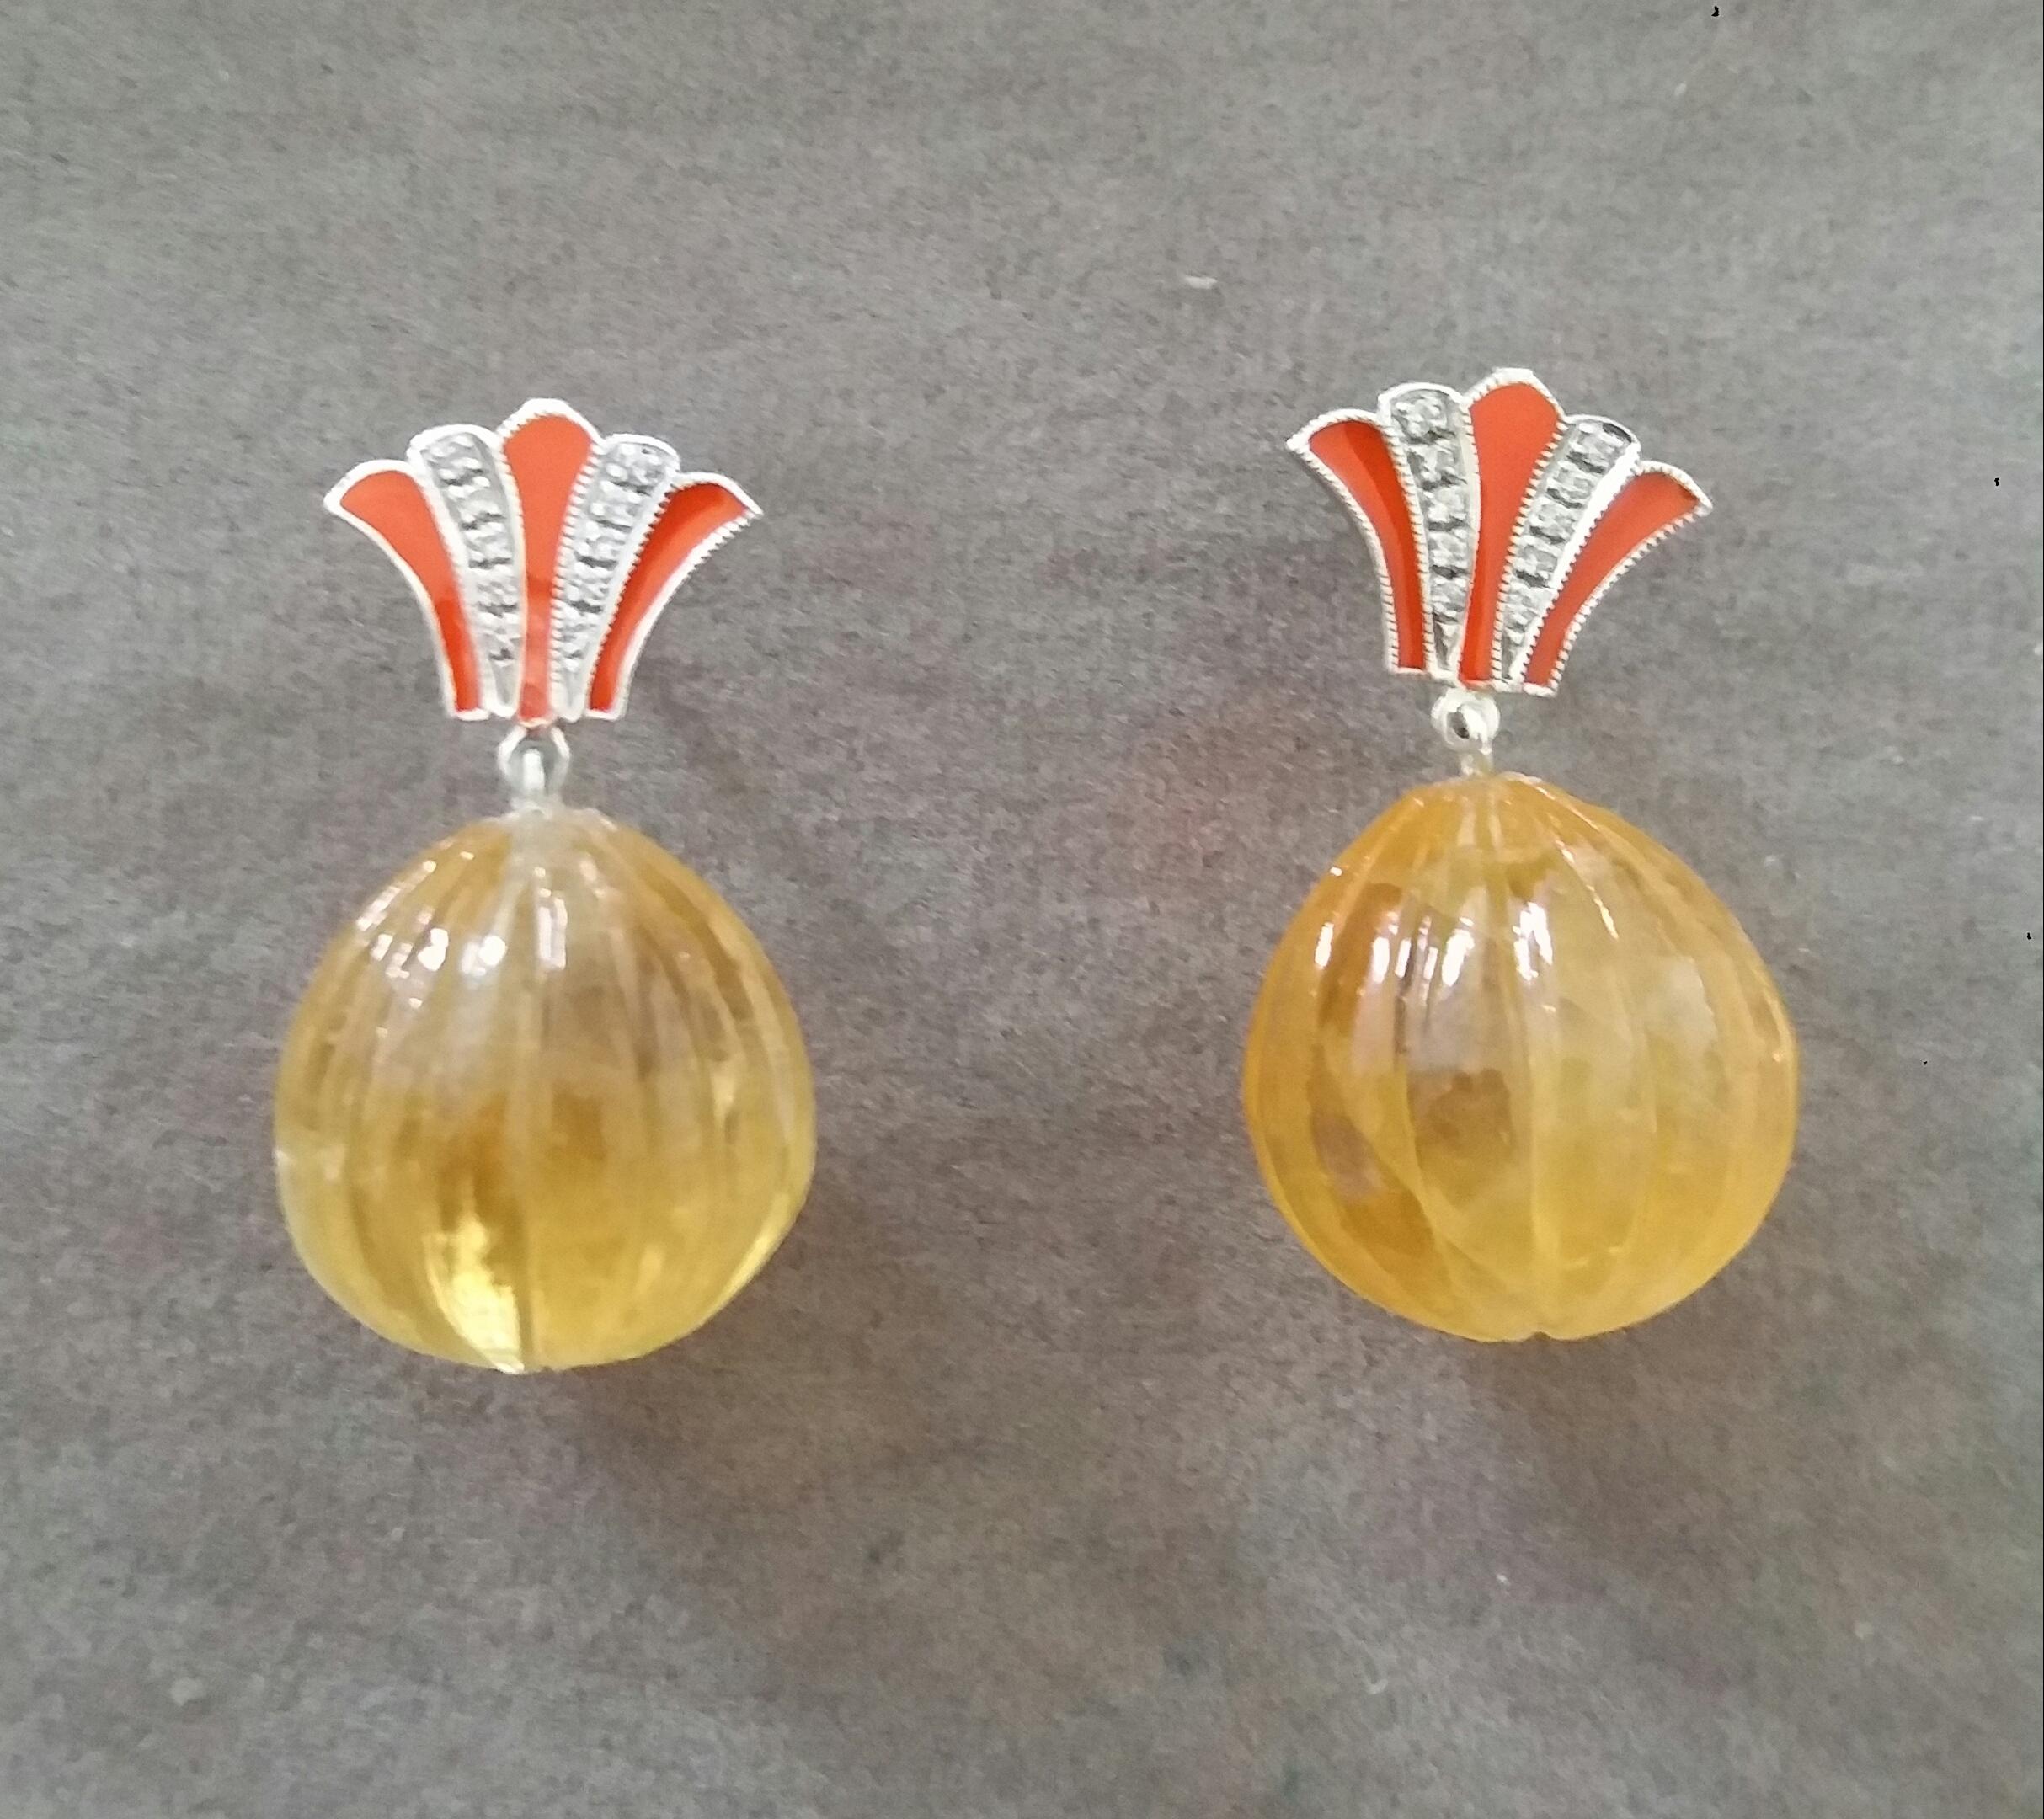 Unique pair of  Citrine Carved Drops earrings with on top 2 white gold elements  in a Crown shape with 20 full cut round Diamonds and Orange Enamel. In the bottom parts we have 2 Citrine Carved Round Drops measuring 15 x 16 mm.

In 1978 our workshop